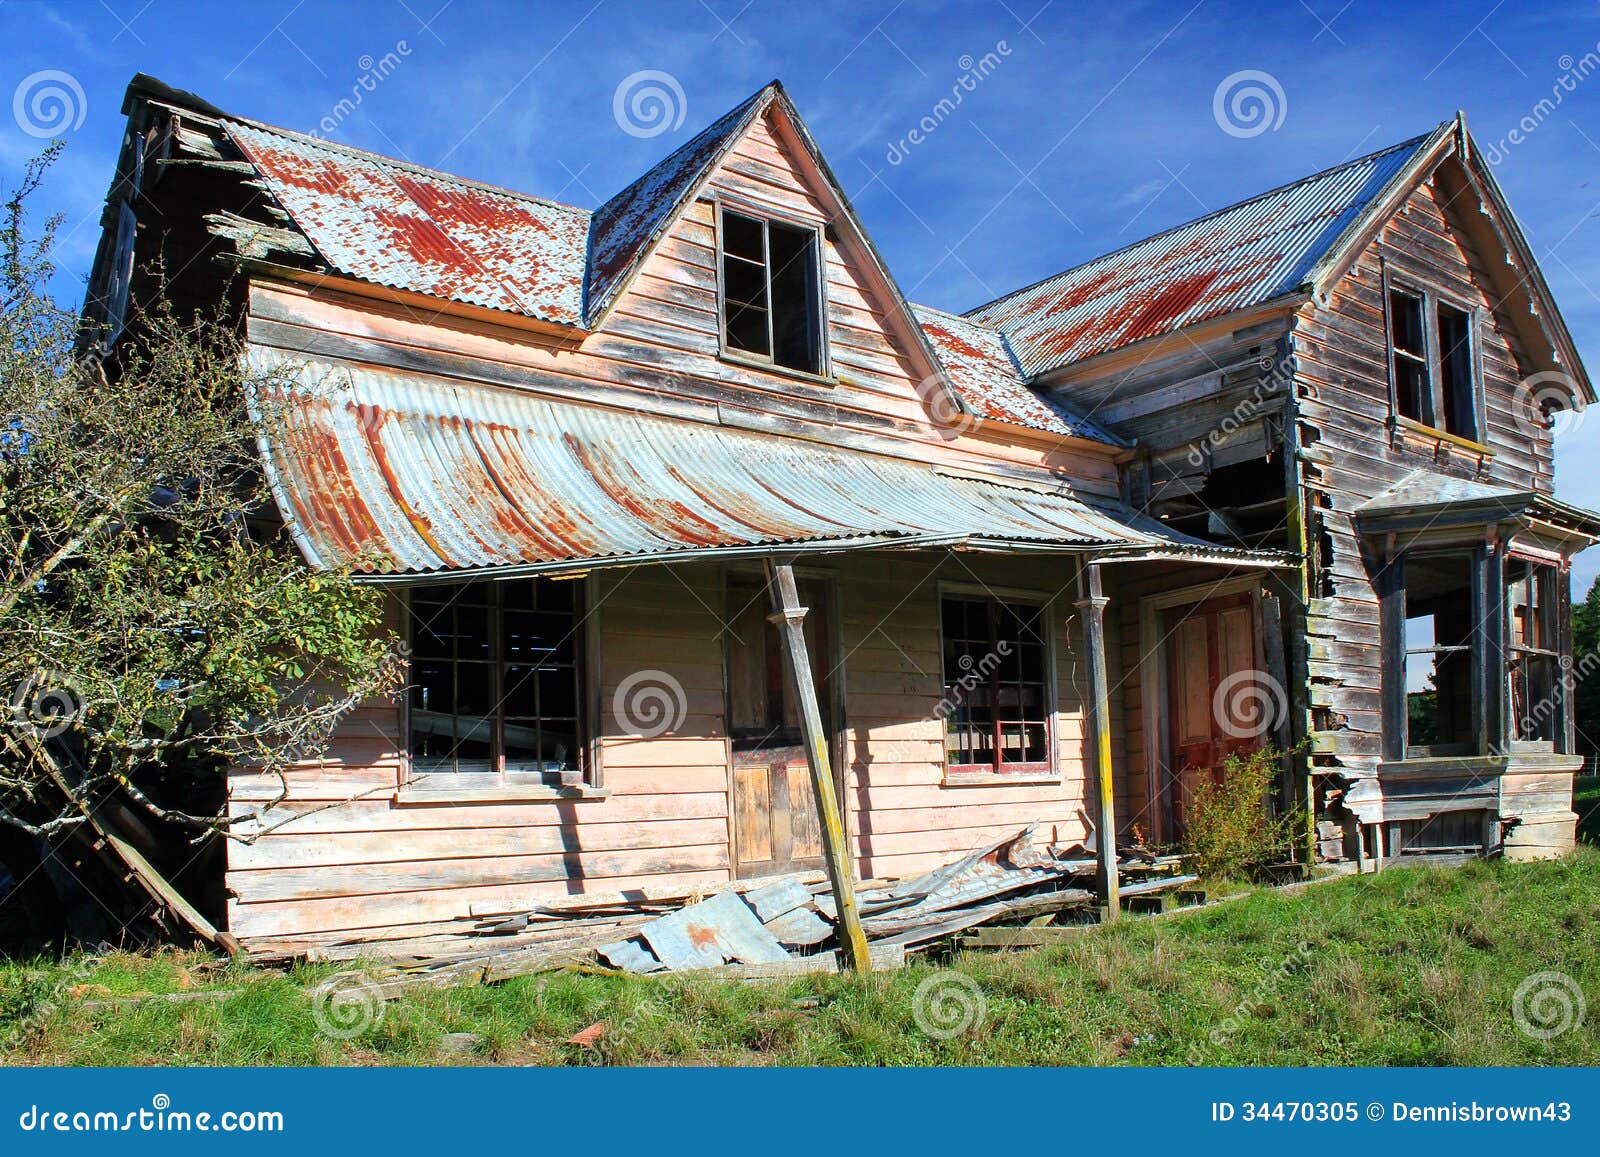 derelict-house-old-wood-corrugated-iron-poor-condition-rusted-falling-down-situated-rural-area-34470305.jpg